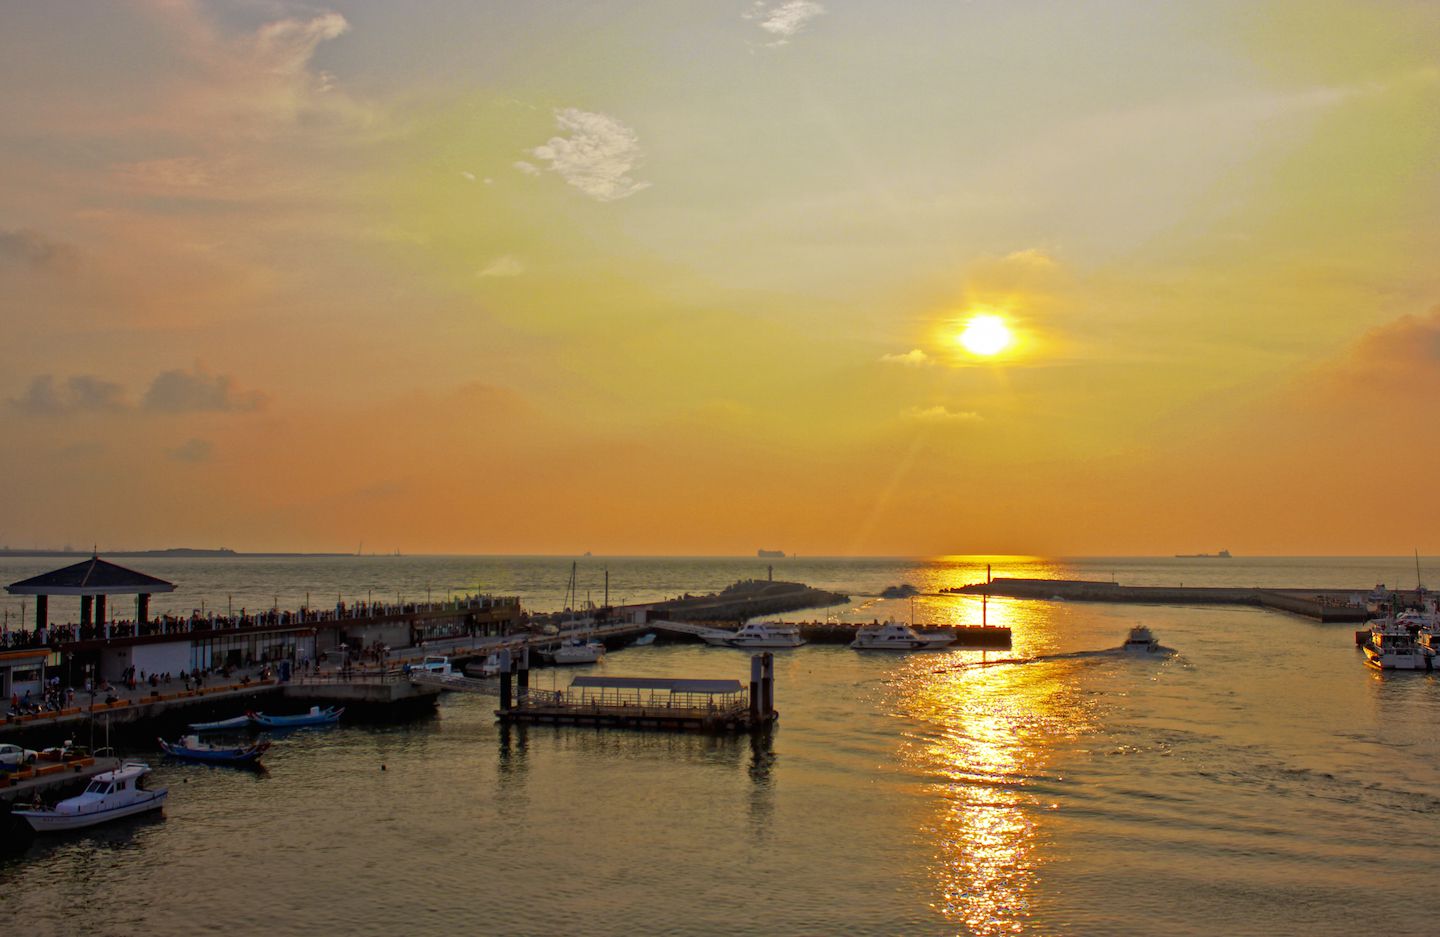 Sunset viewed from the Lover's Bridge in Tamsui